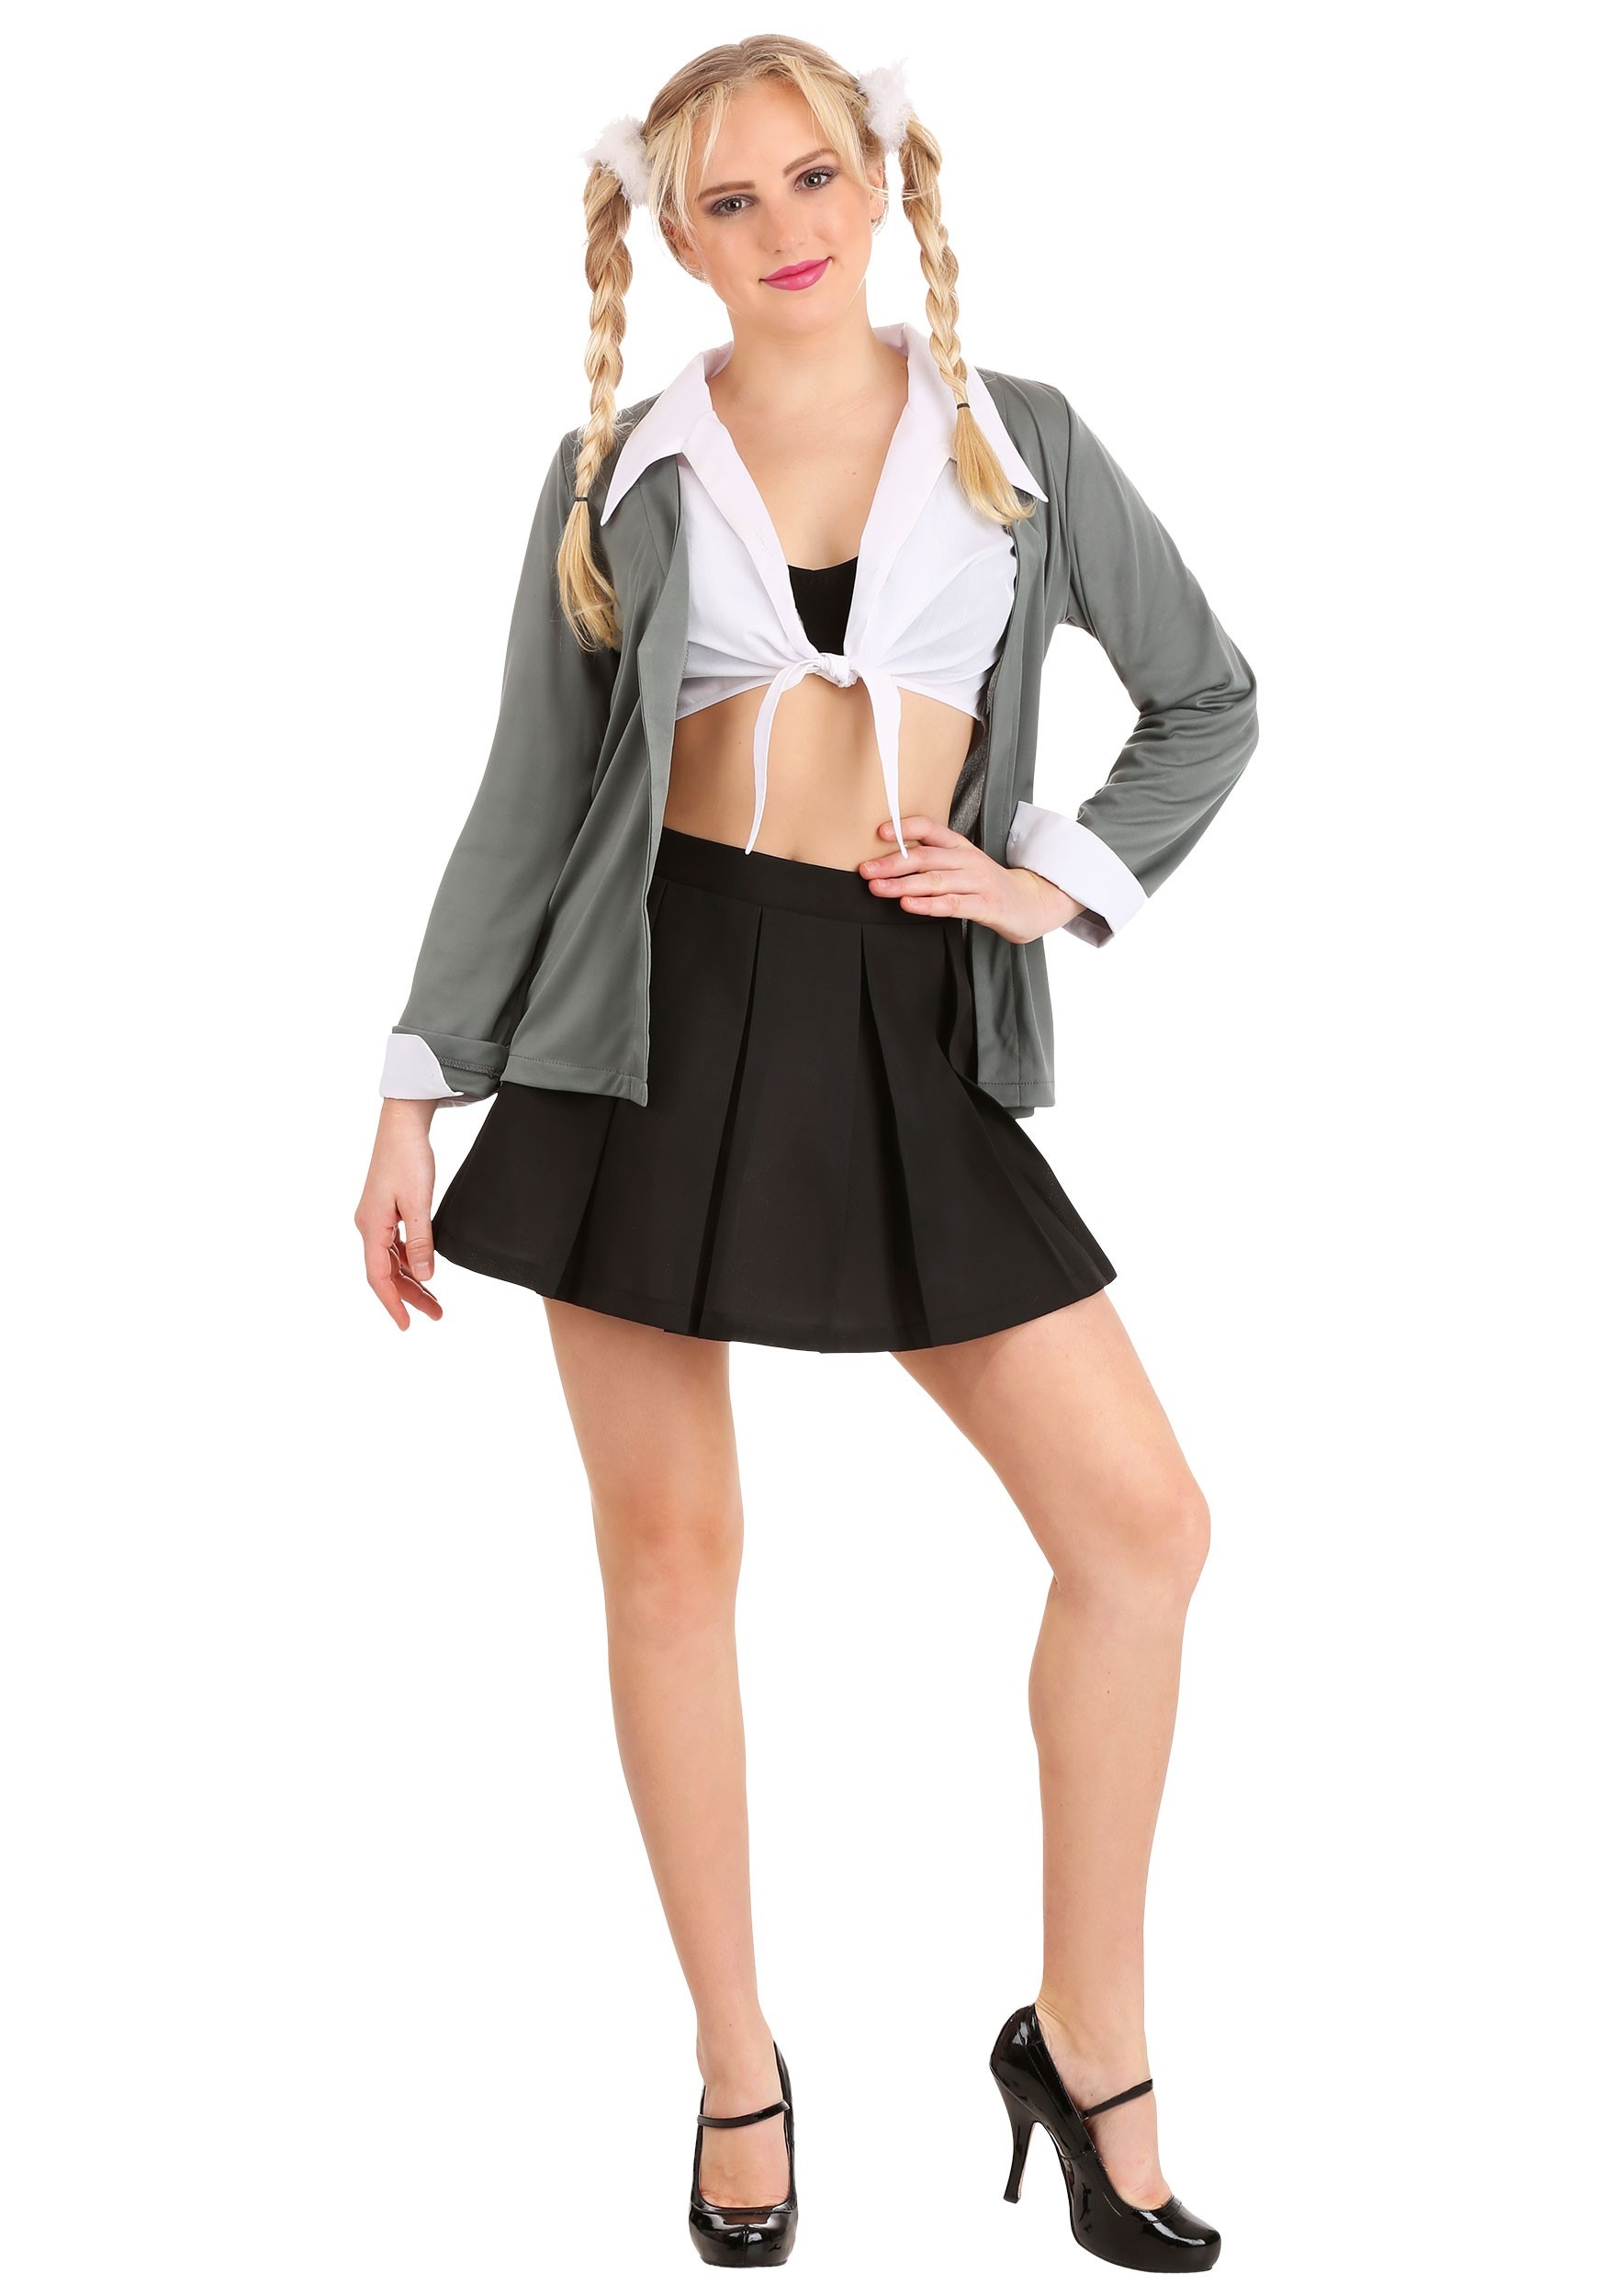 Photos - Fancy Dress more. FUN Costumes One More Time Pop Singer  Costume for Women | Excl 